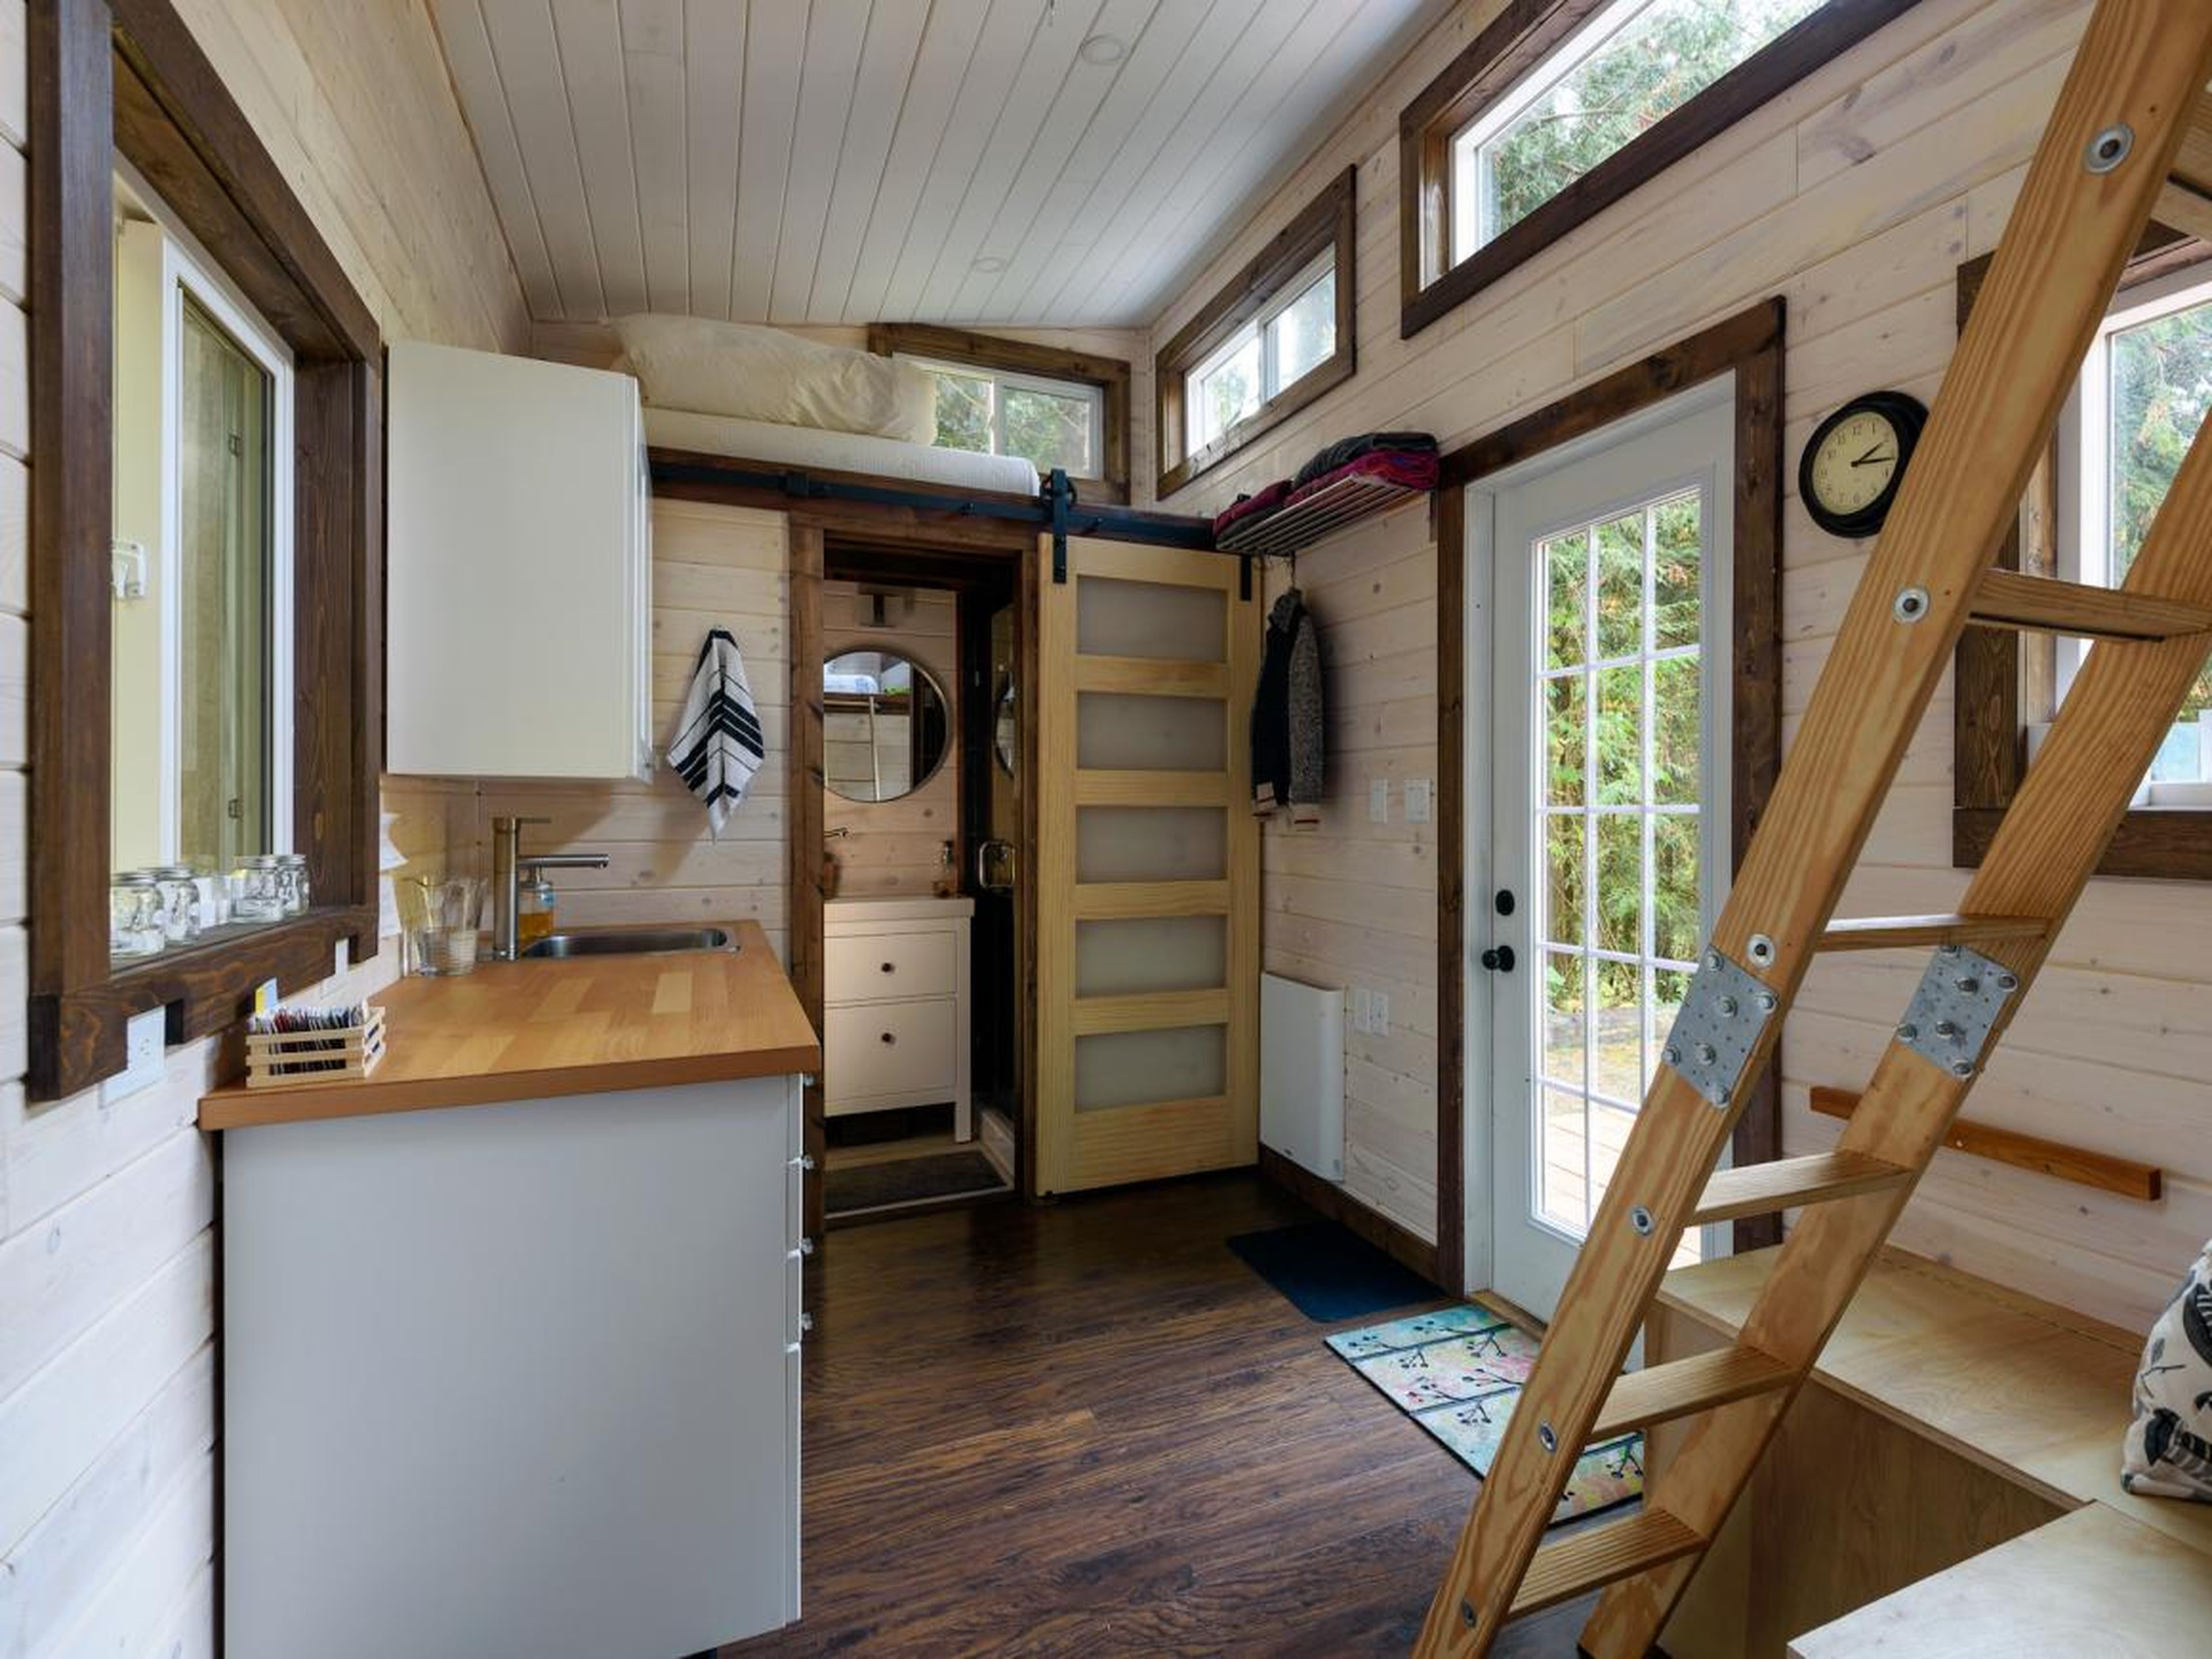 A tiny house is actually more expensive per square foot.